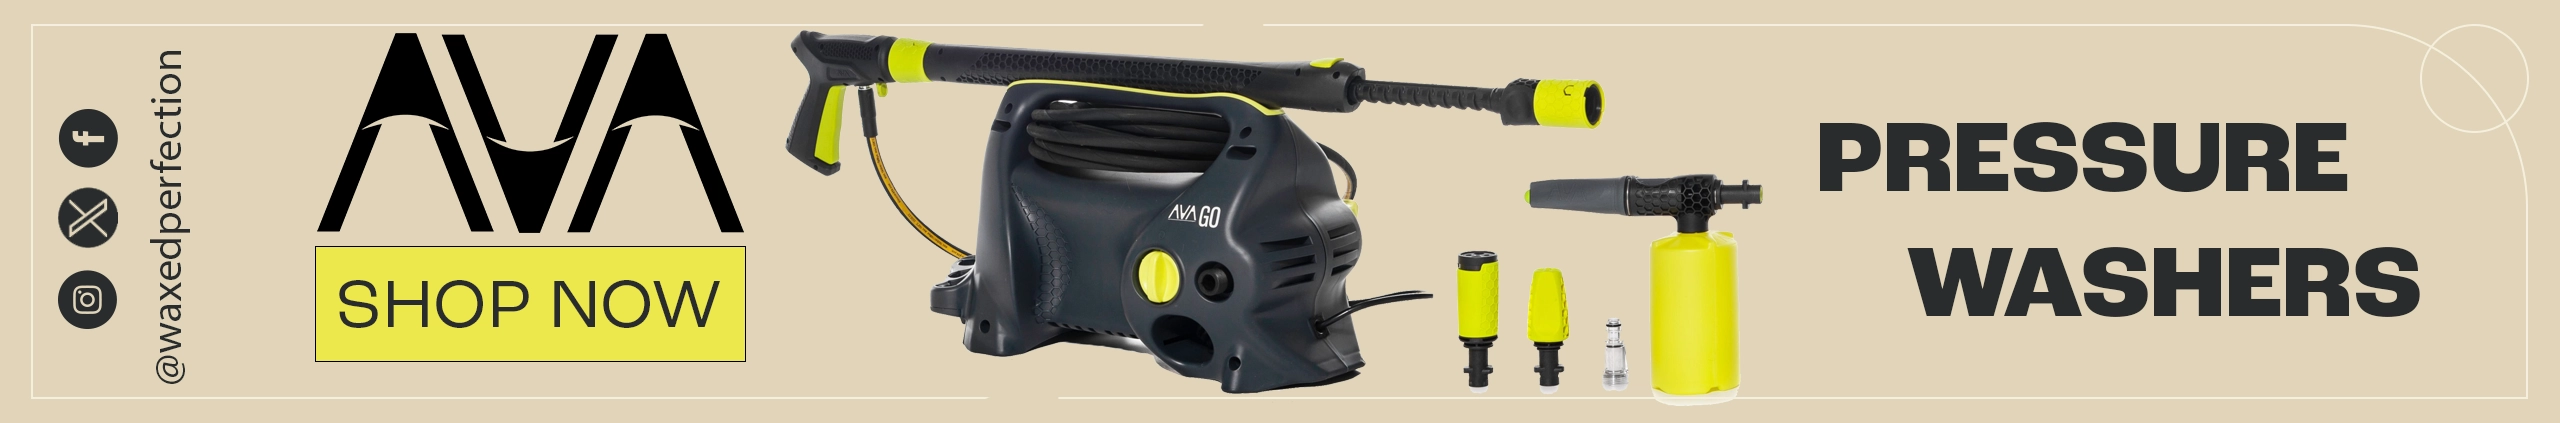 AVA Pressure Washers are made to last and to give you the new washing experience